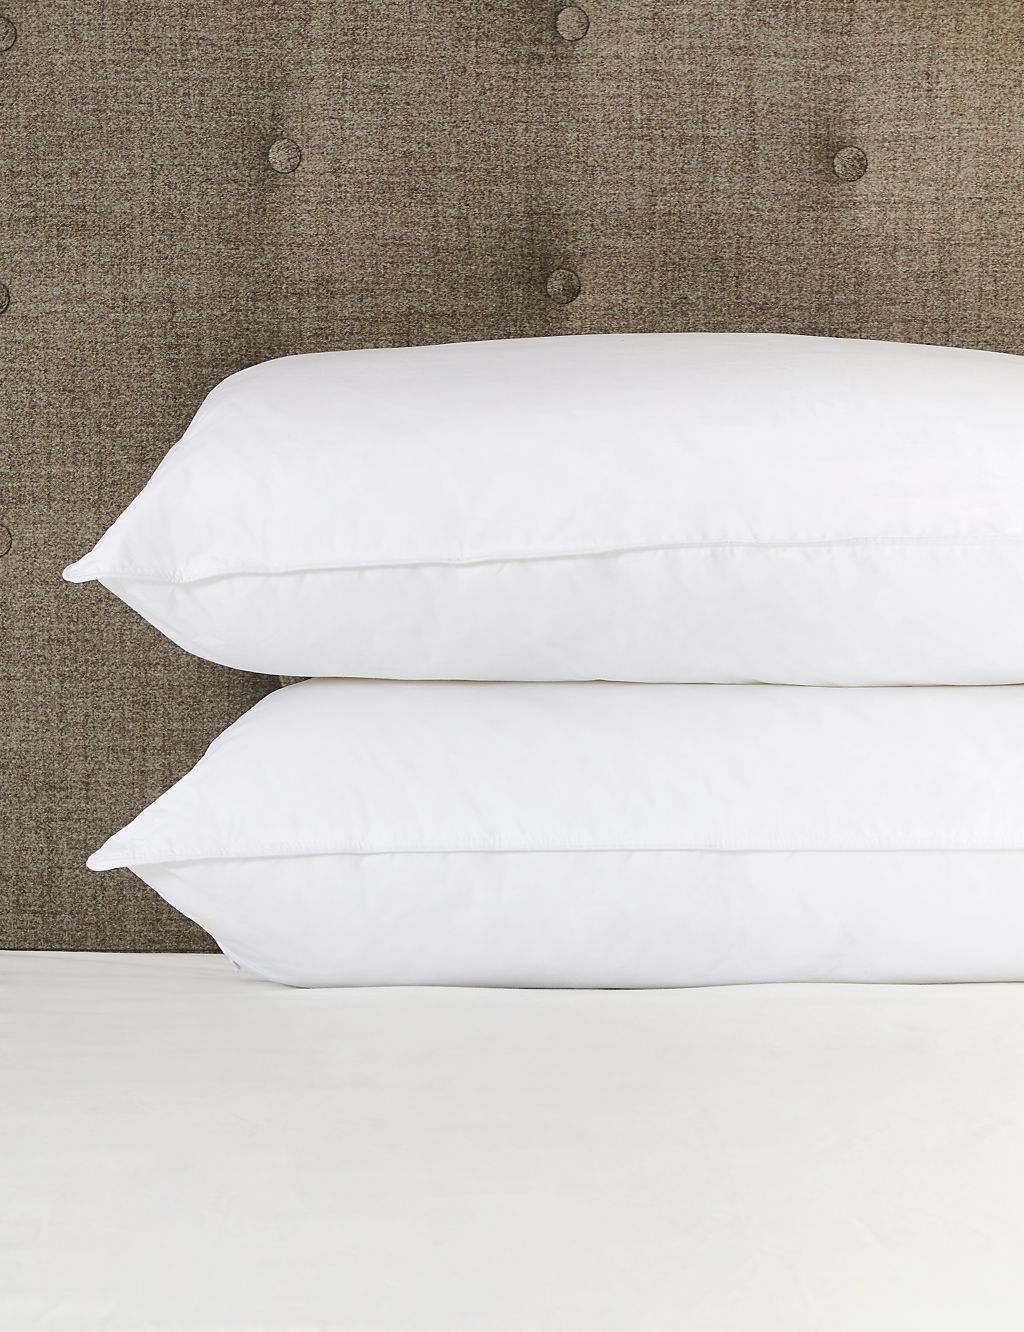 Supremely Washable Kingsize Firm Pillow 1 of 3